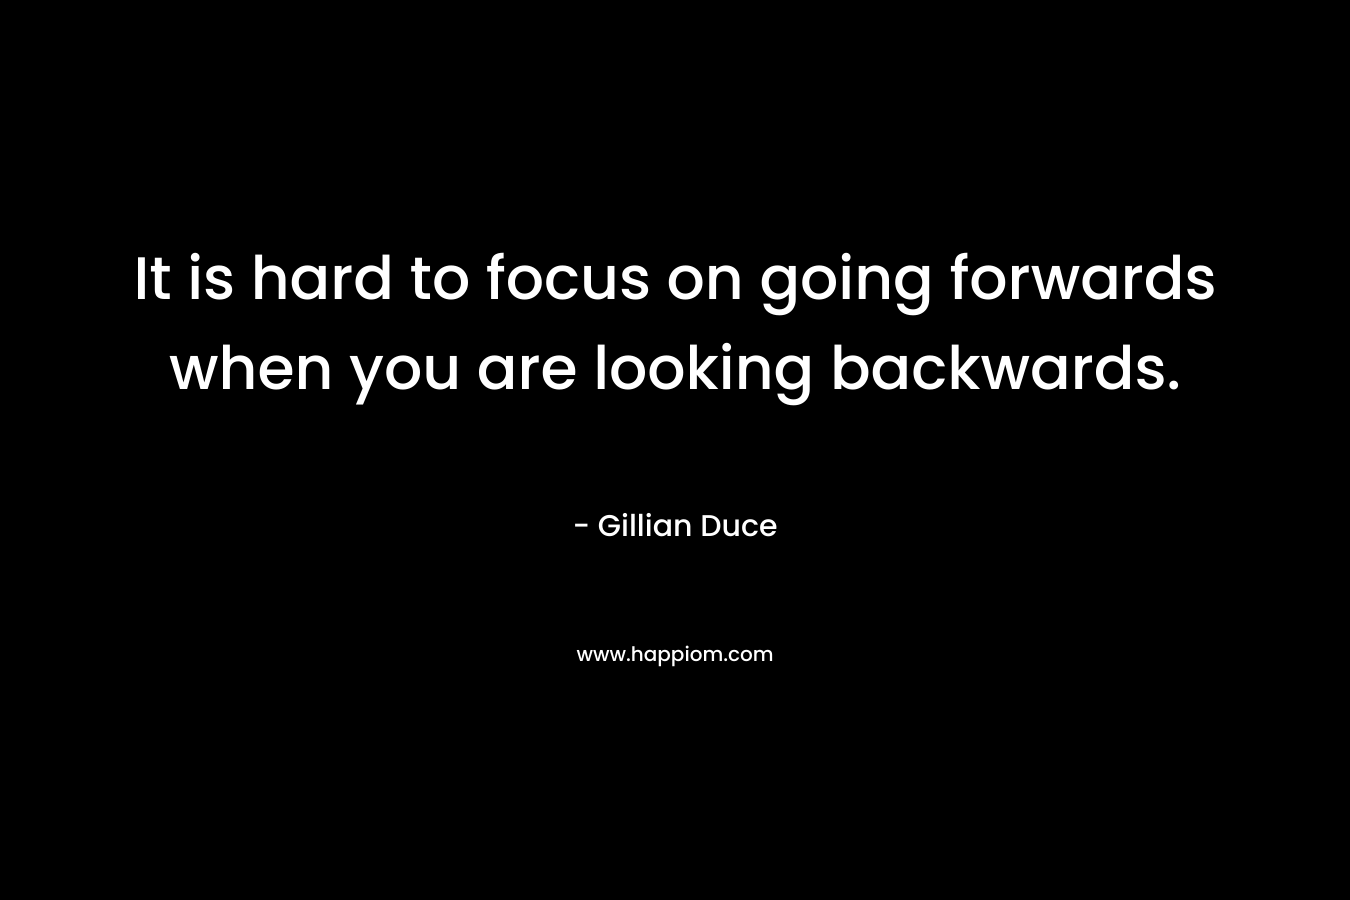 It is hard to focus on going forwards when you are looking backwards. – Gillian Duce